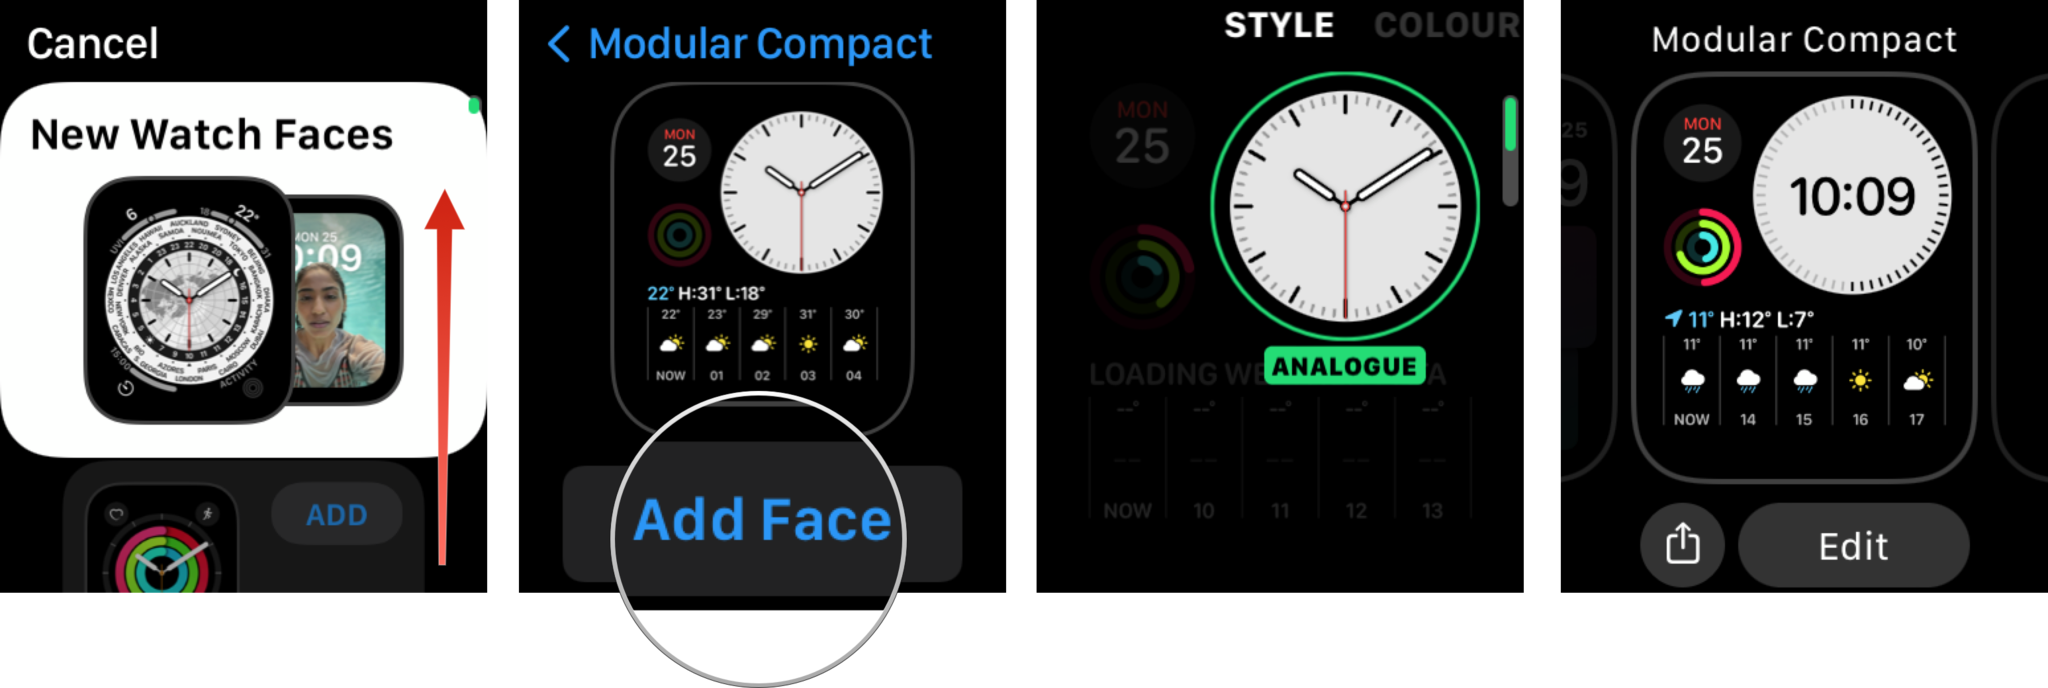 Add a clock dial via Apple Watch: Swipe up or down or scroll with Digital Crown, tap the clock dial you want to use and tap Add face, adjust complications and colors, press Digital Crown to confirm changes and add clock face